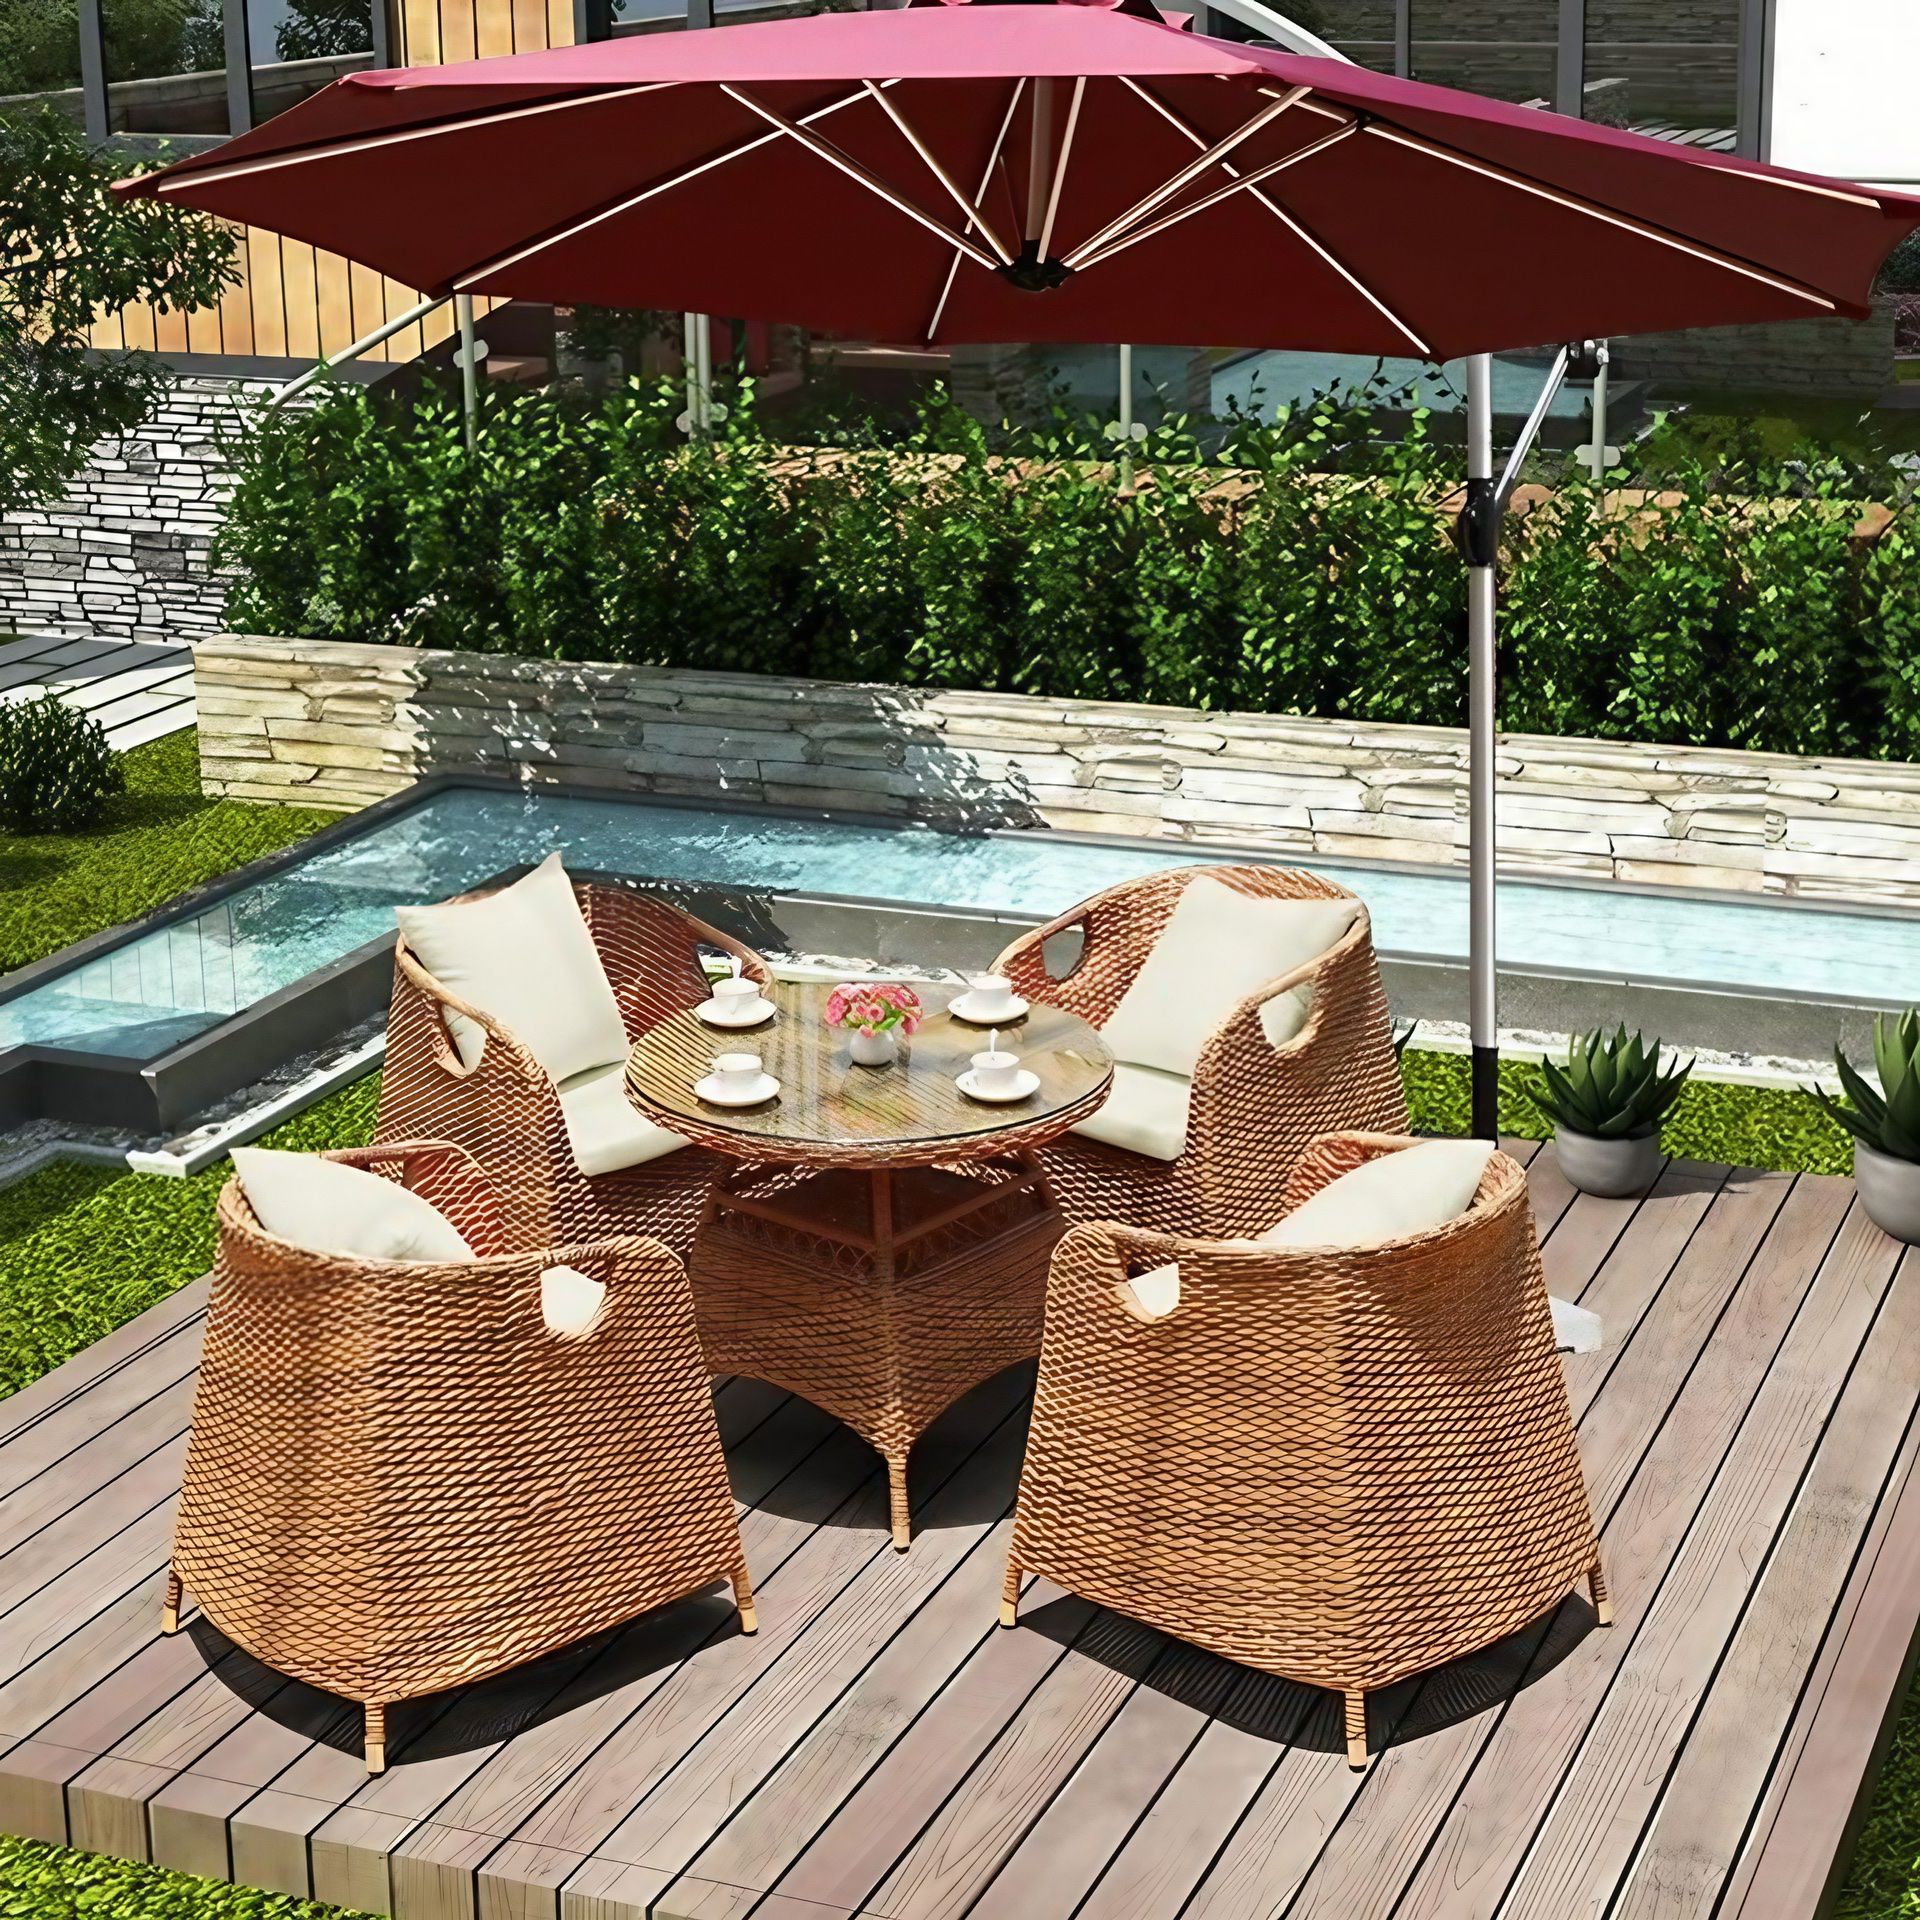 Chic Patio Porch Furniture Set - 5 PE Rattan Wicker Chairs with Glass Table - Outdoor Garden Furniture Sets for Comfortable & Stylish Living